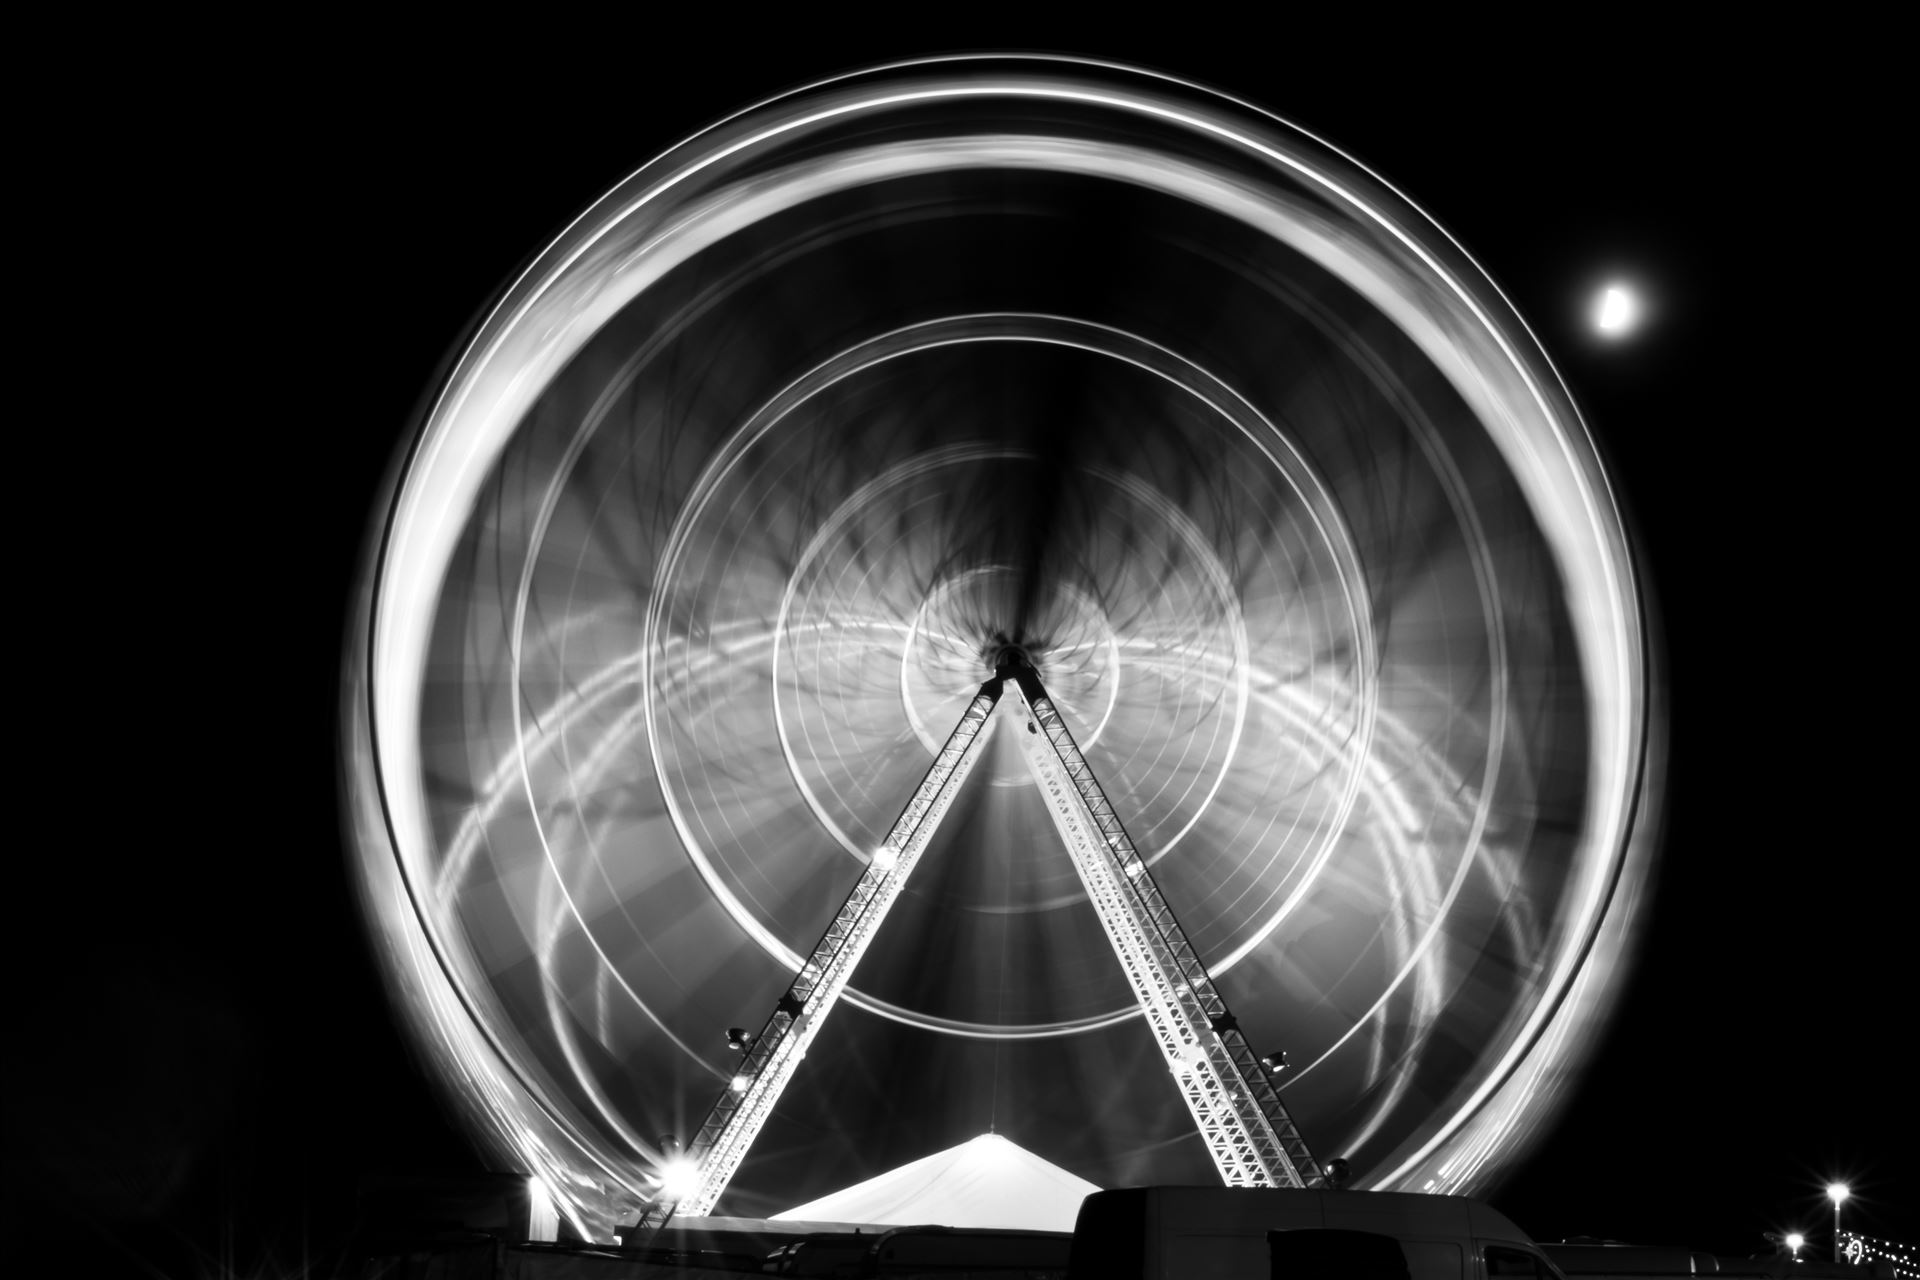 Ferris Wheel 10 second exposure - A ferris wheel taken at night at Roker seafront, Sunderland by AJ Stoves Photography